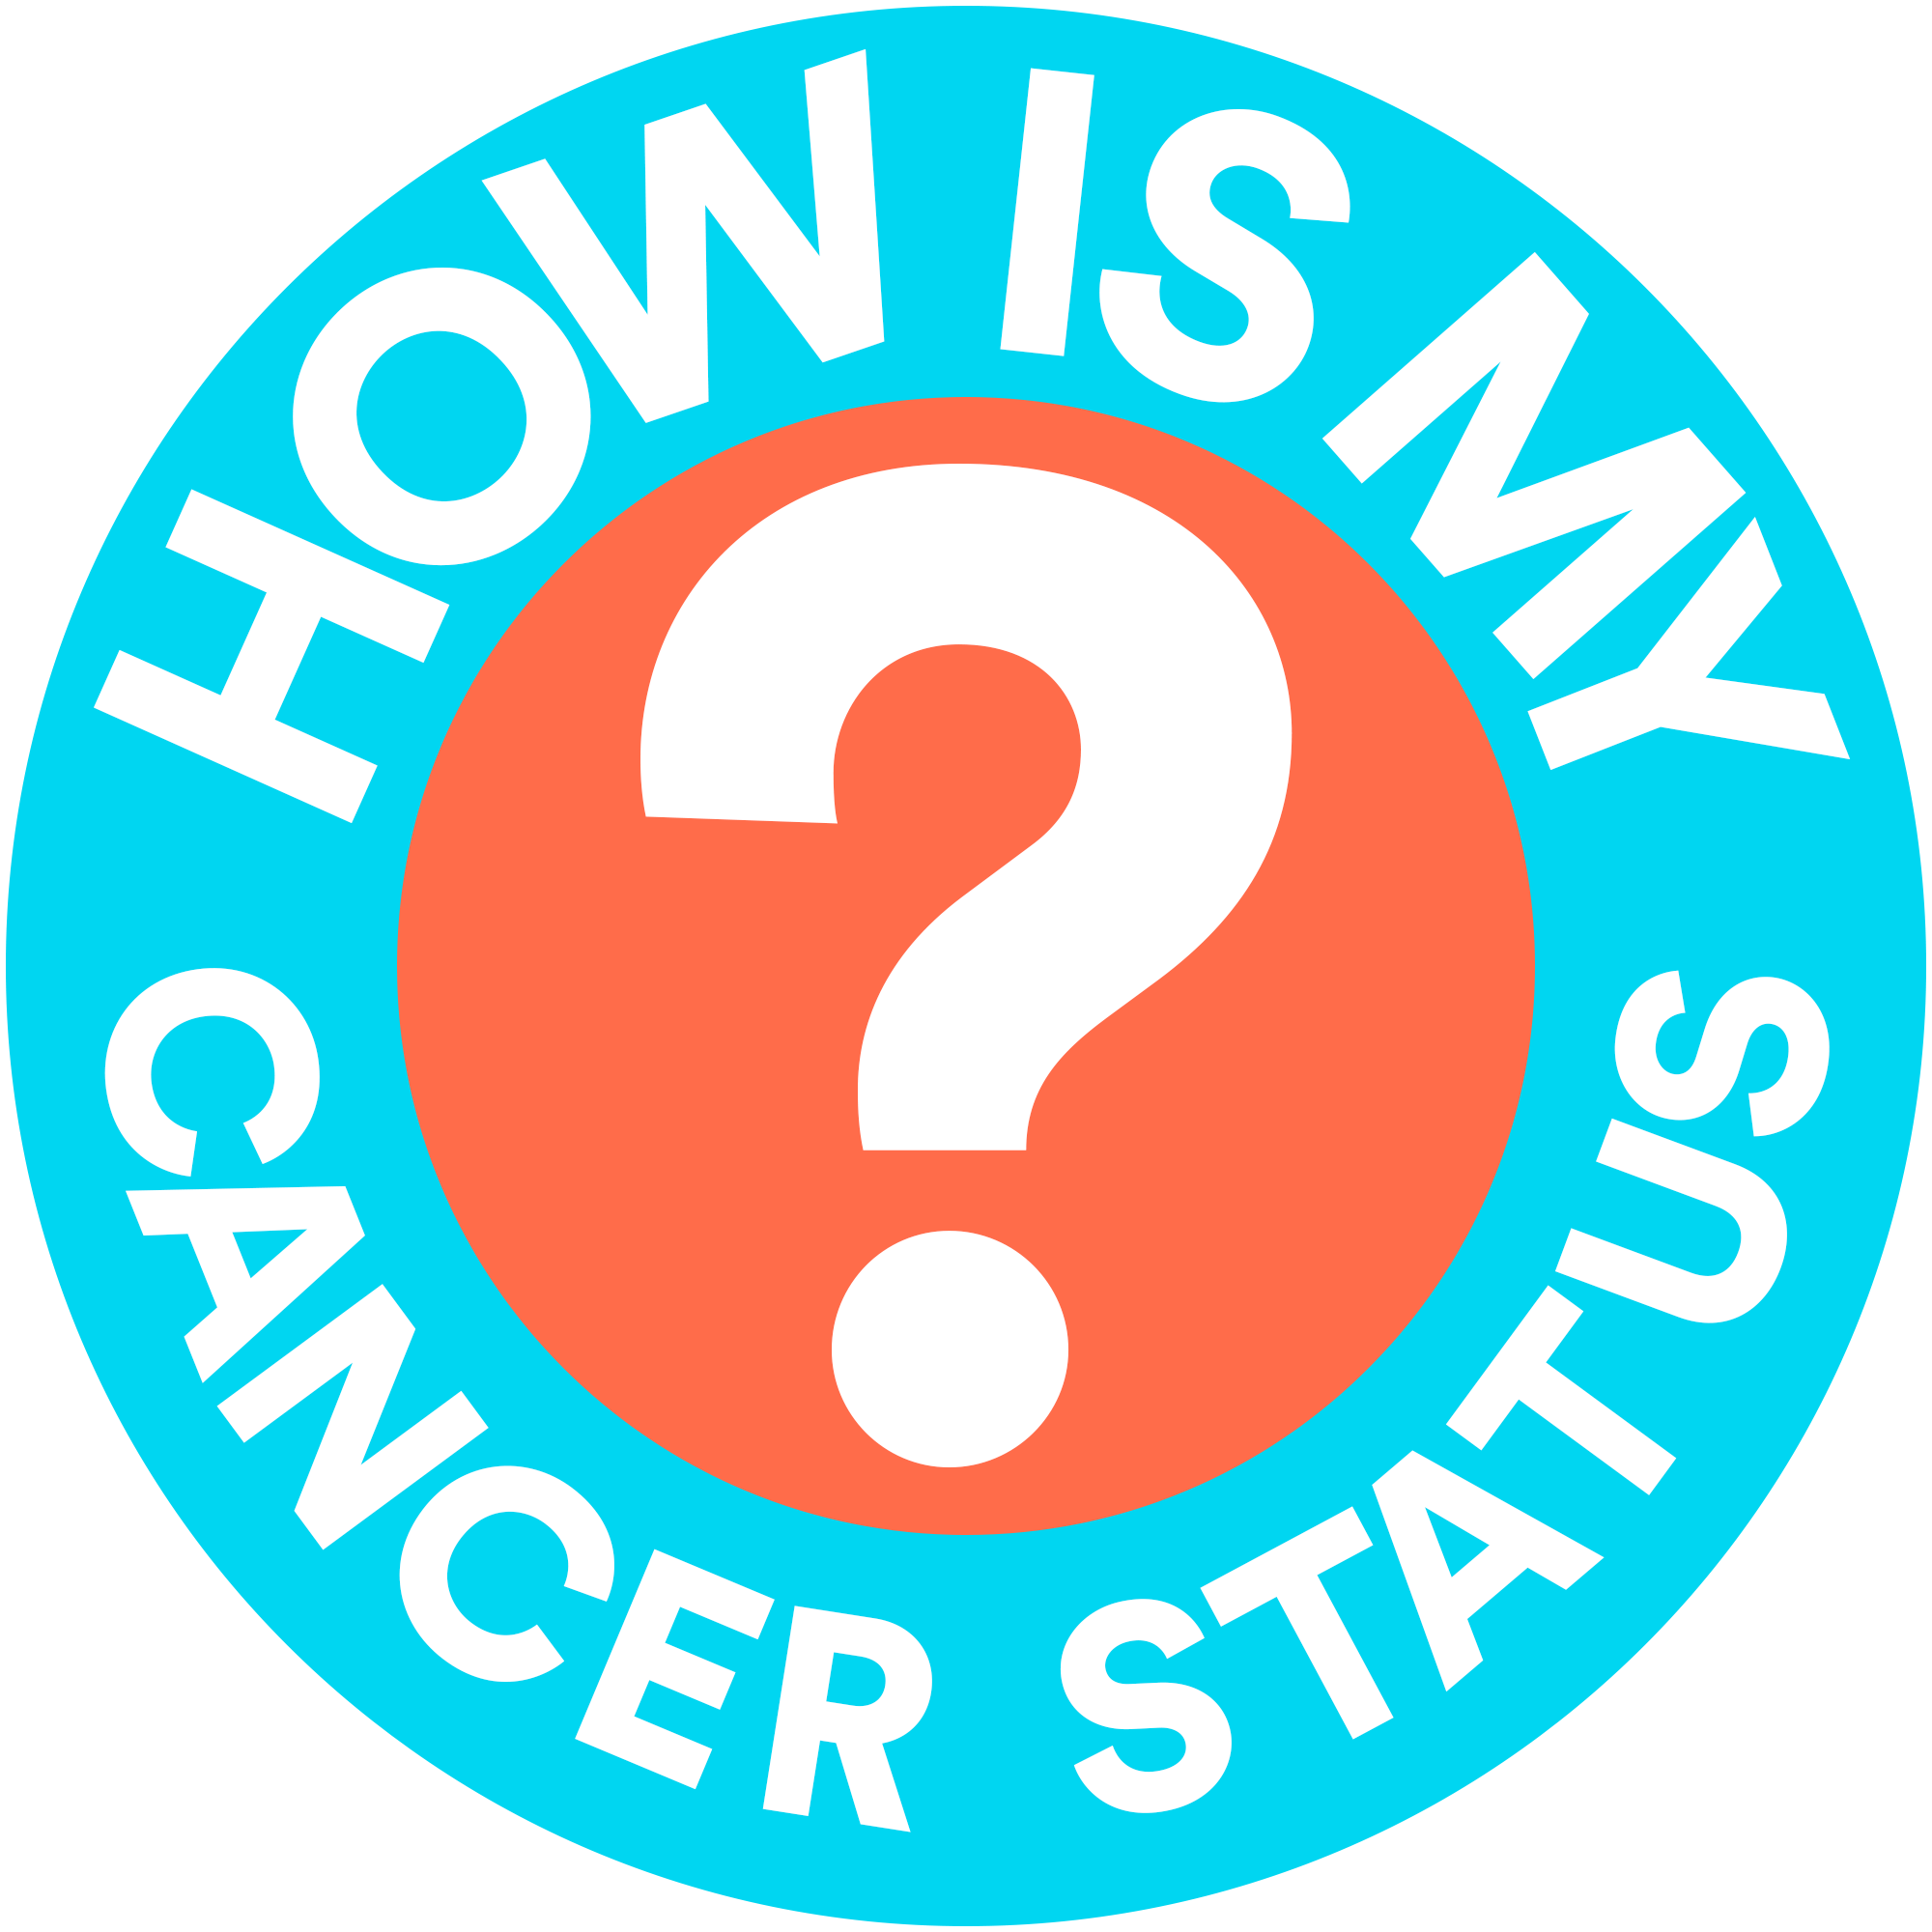 how is my cancer status